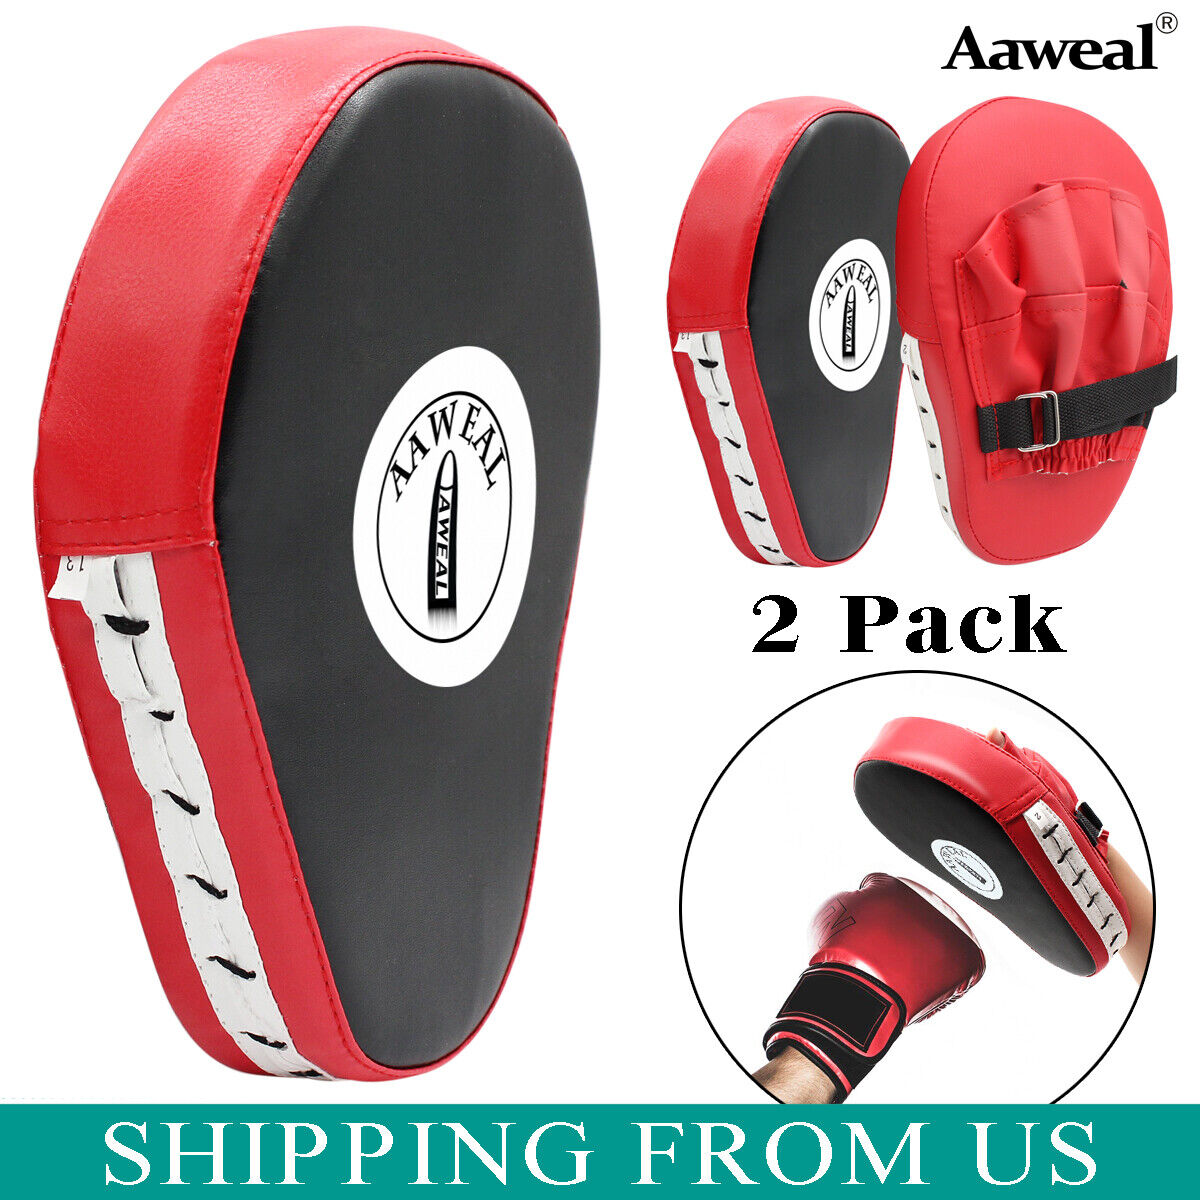 2x Punching Mitts Kickboxing Training Punch MMA Boxing Hand Target Focus Pads Aaweal Does Not Apply